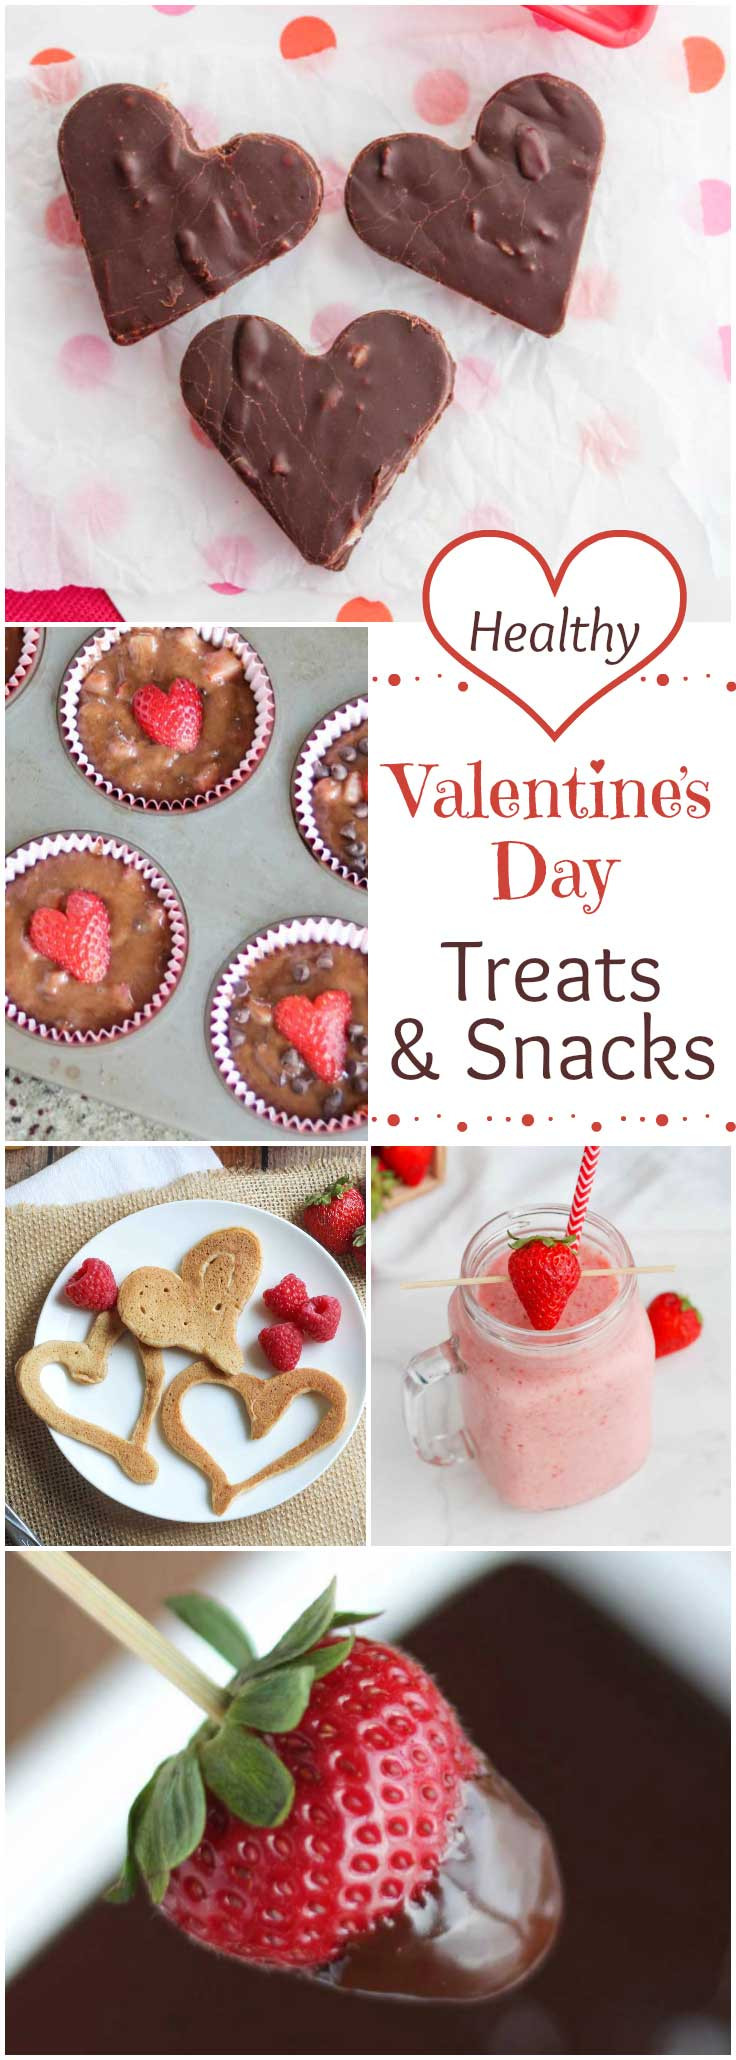 Healthy Valentine'S Day Desserts
 Easy Healthy Valentine s Day Treats and Snacks Two